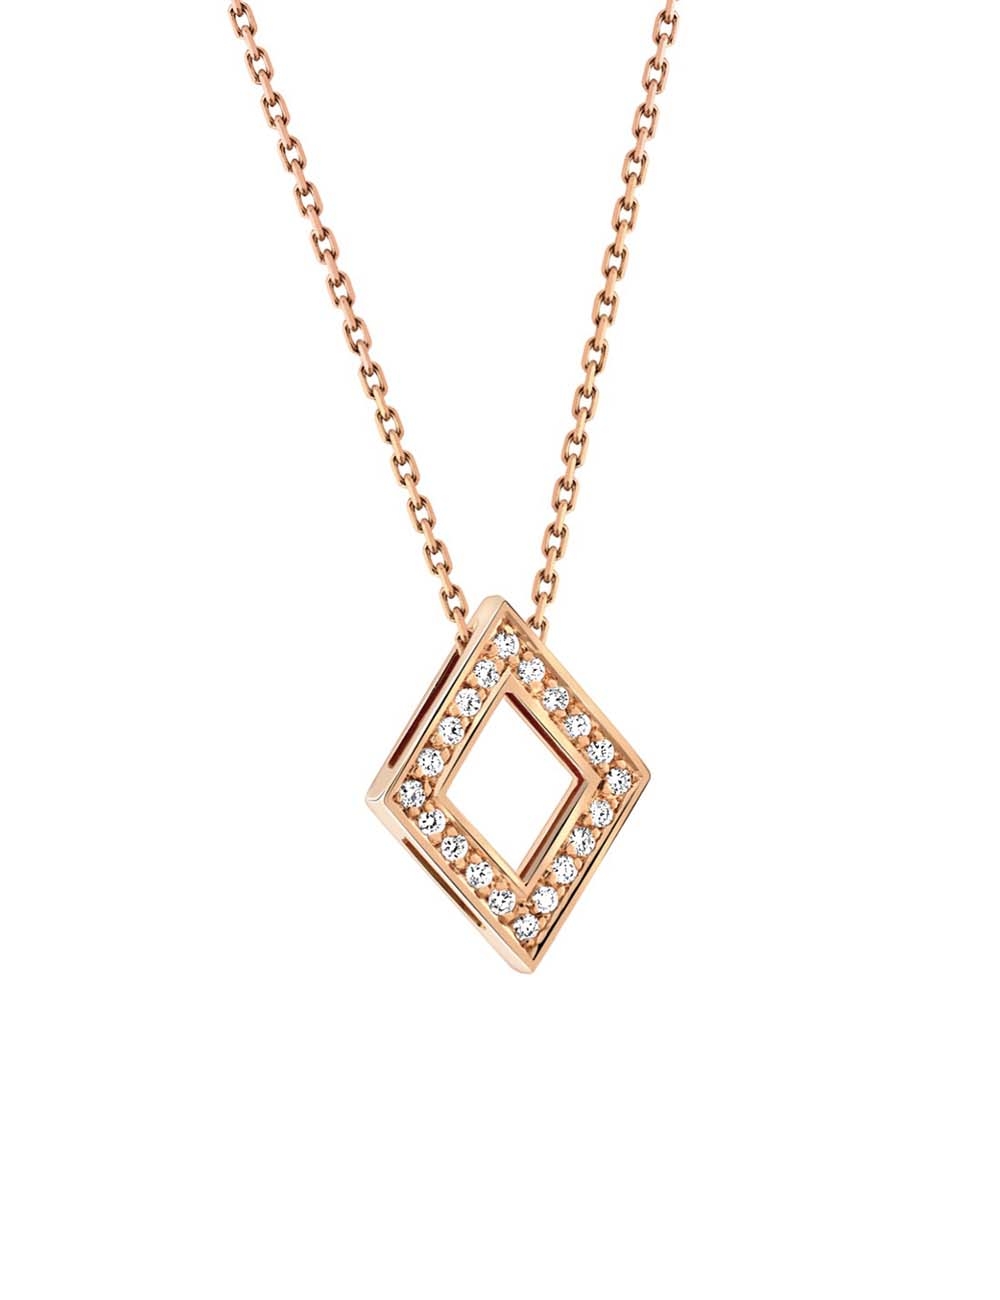 Luxury necklace for women in rose gold and white diamonds